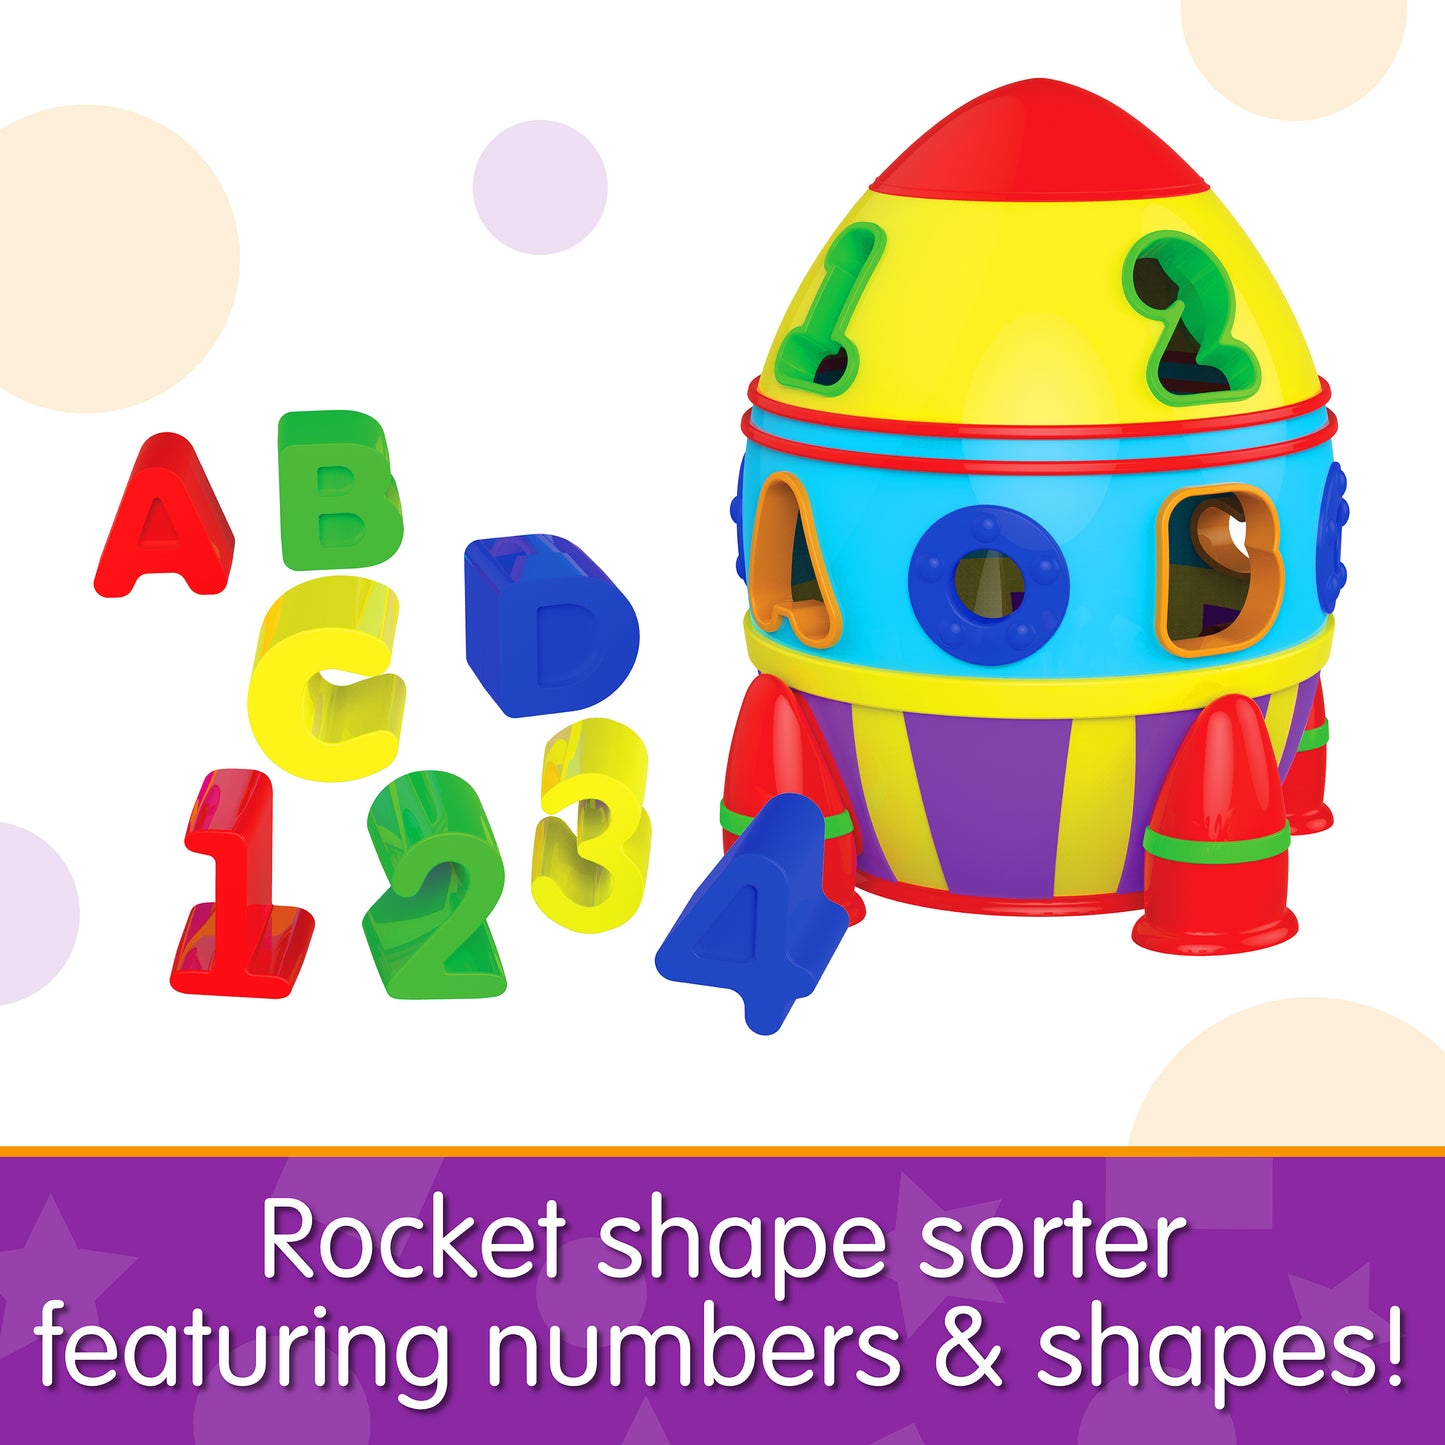 Infographic about Rocket Shape Sorter that says, "Rocket shape sorter featuring numbers and shapes!"